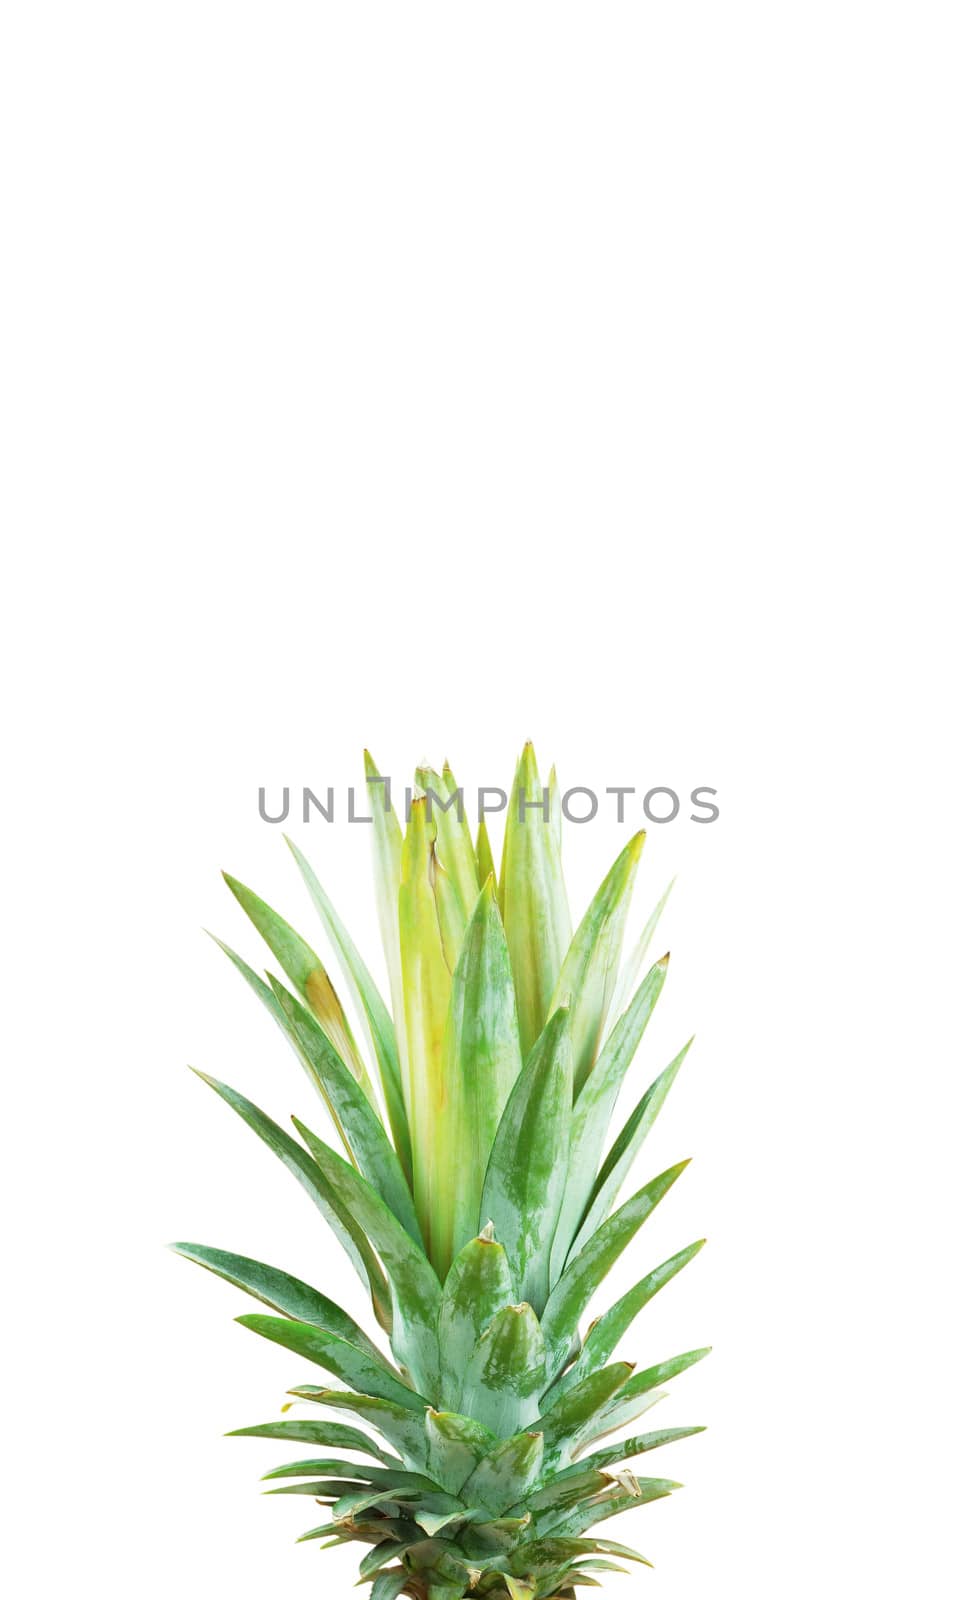 Pineapple of leaves with the white background.